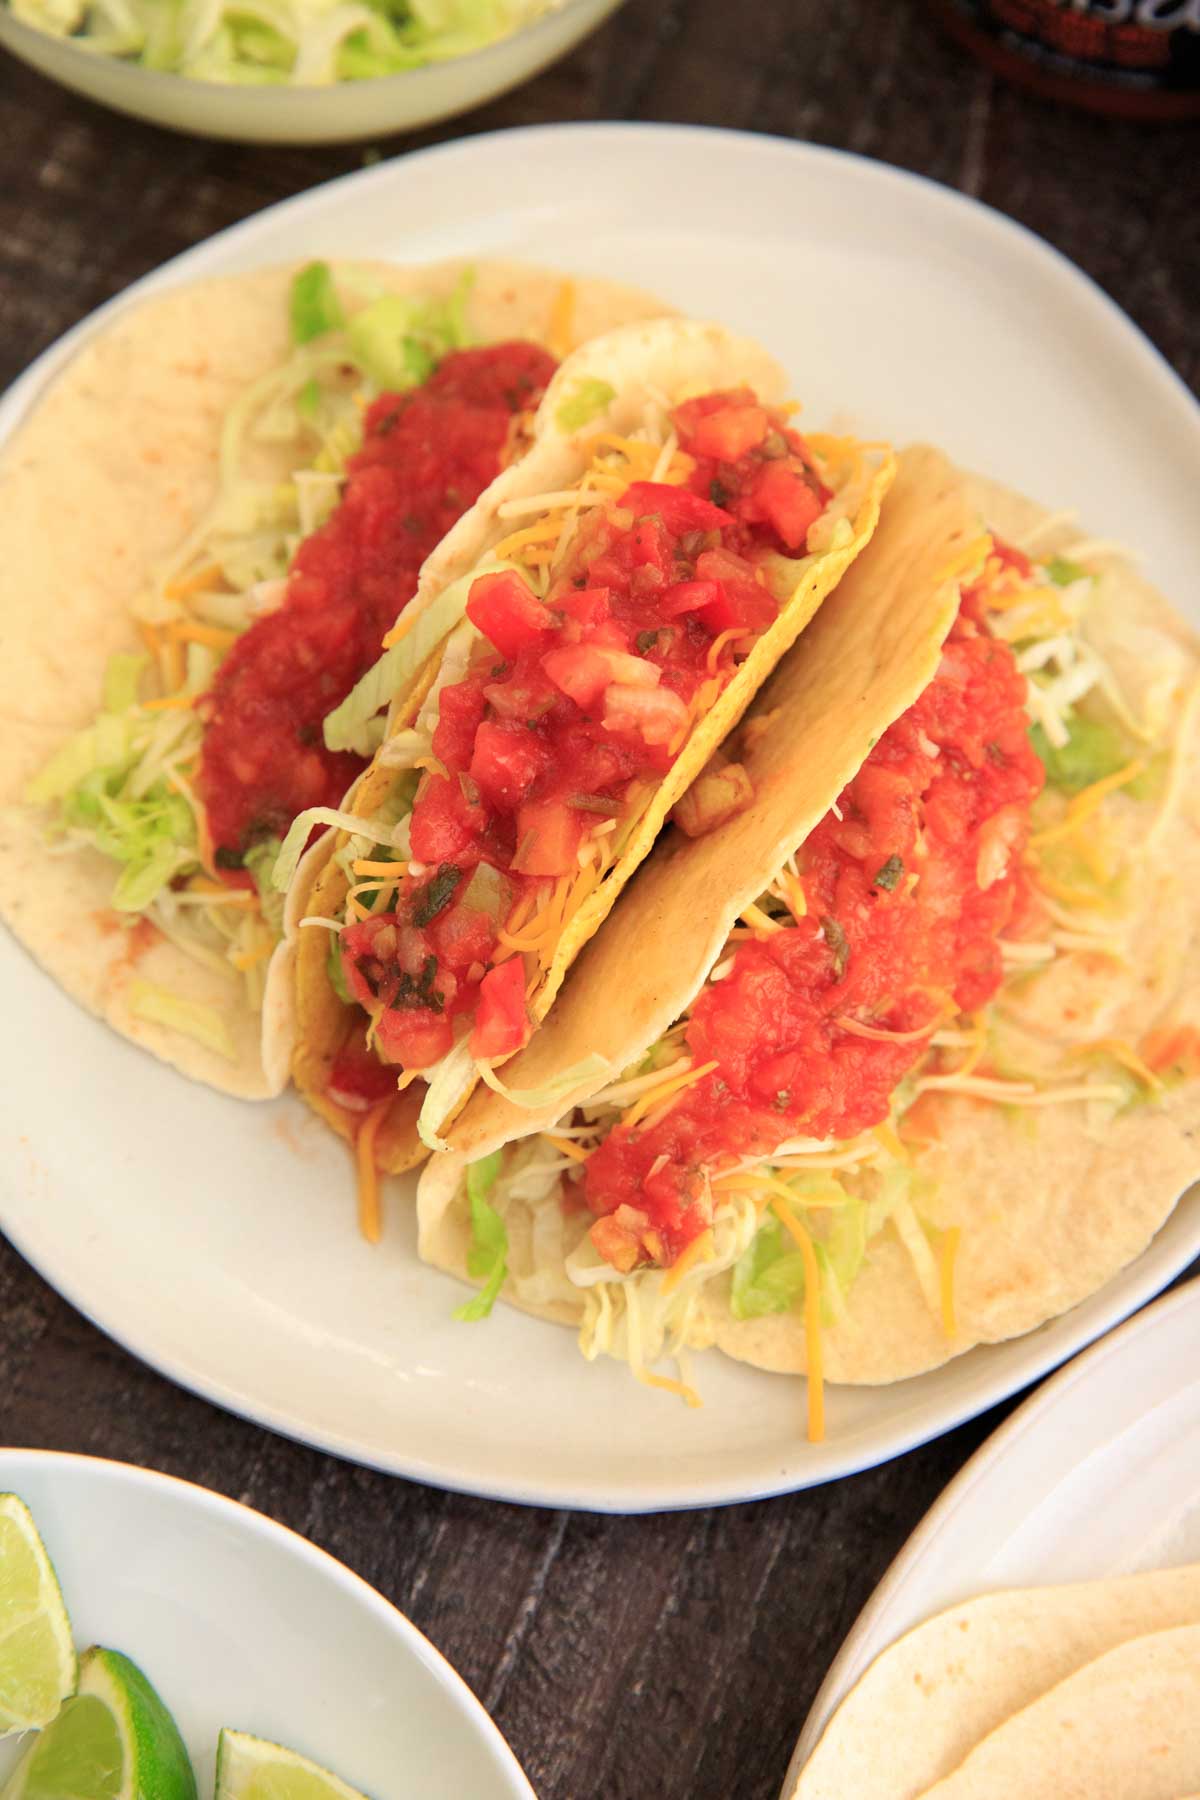 Taco Night with Fresh Cravings Salsa